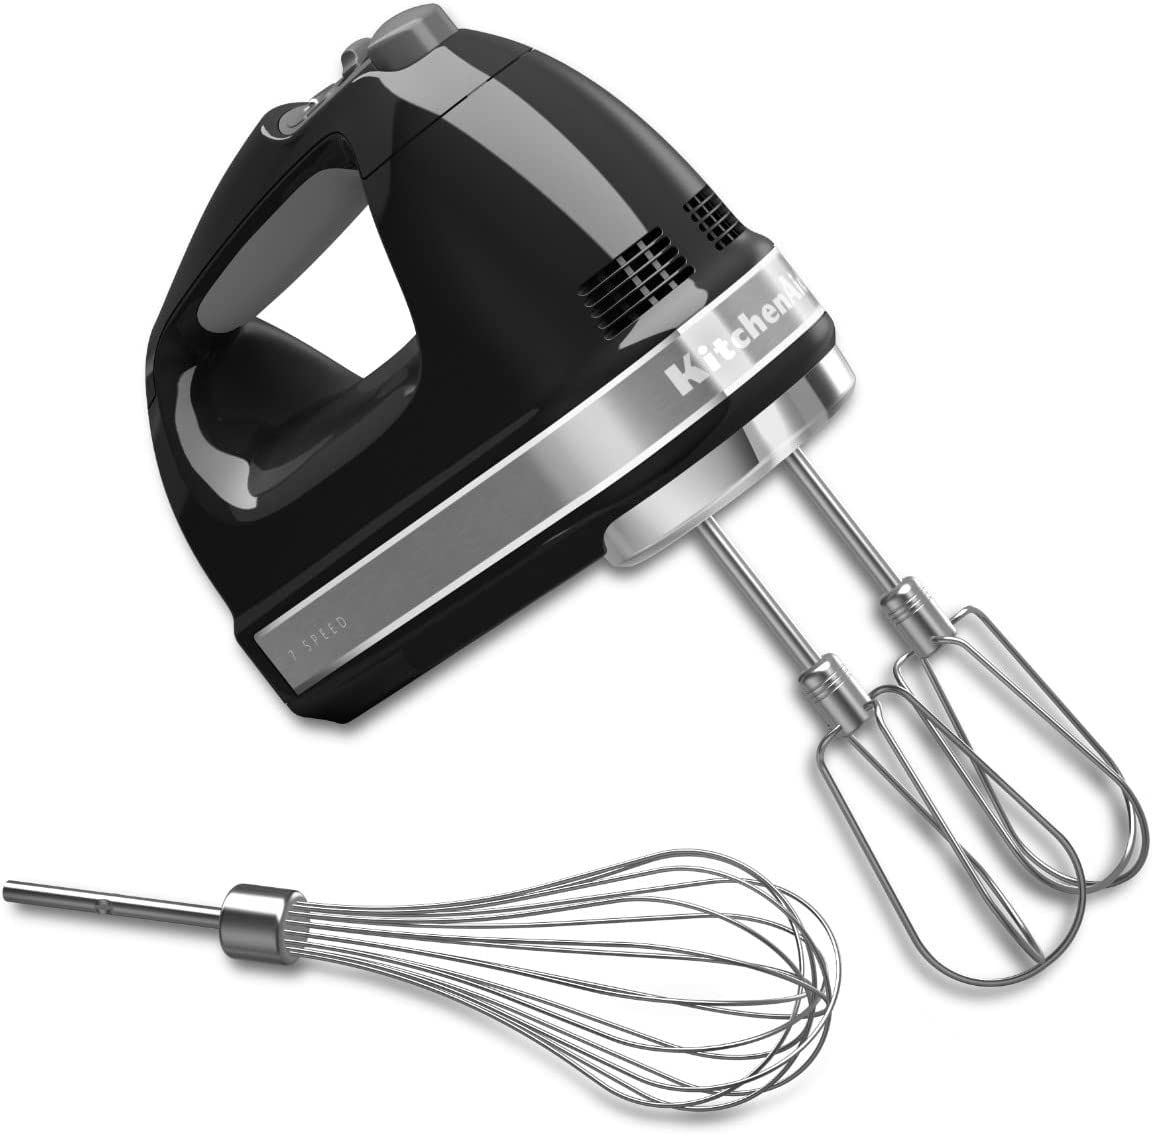 KitchenAid KHM7210CU 7-Speed Digital Hand Mixer with Turbo Beater II Accessories and Pro Whisk – Contour Silver Import To Shop